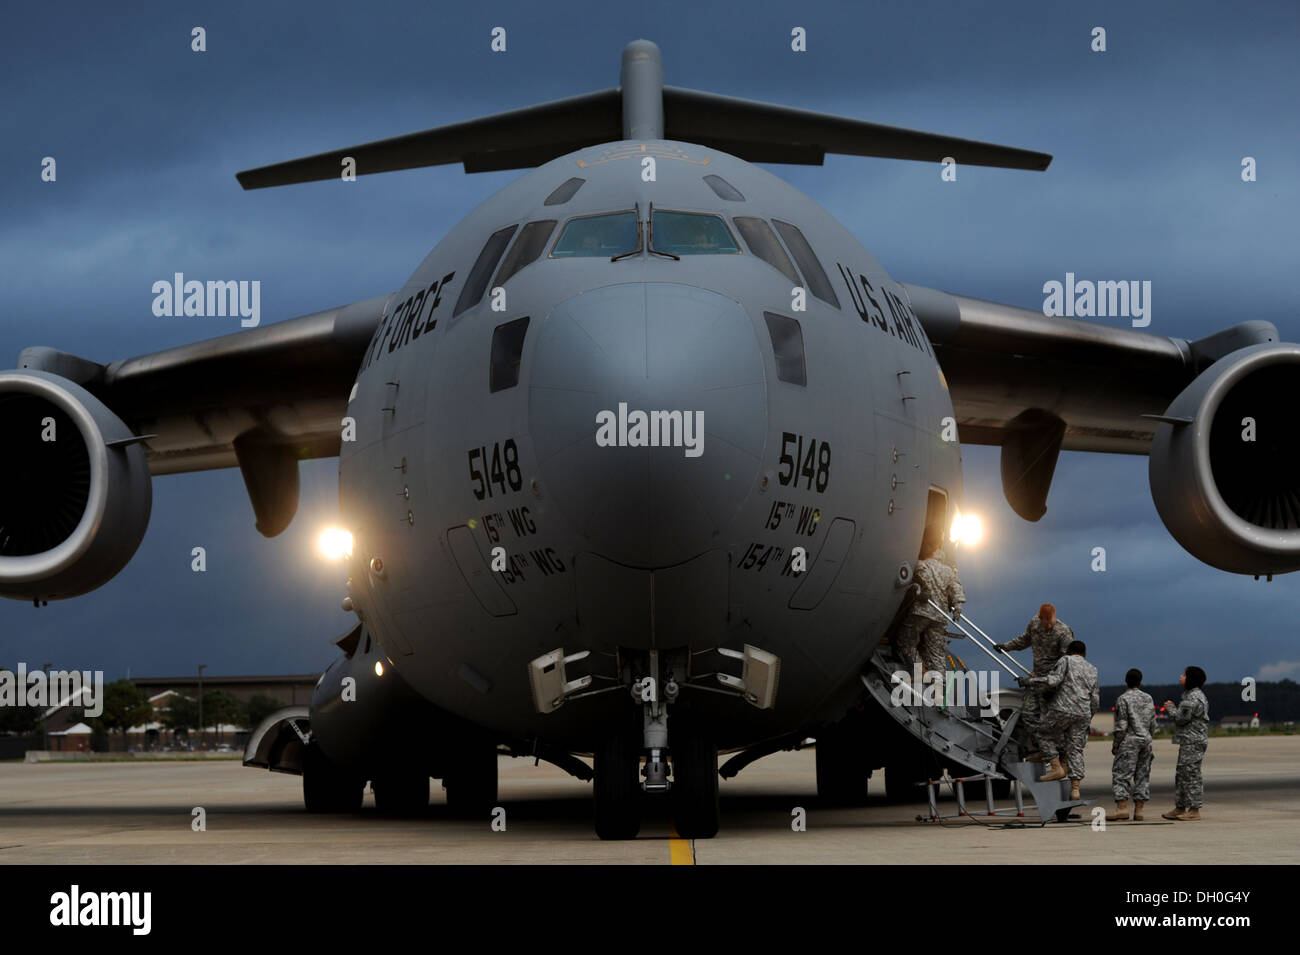 C-17 Globemaster III during an unloading mission at Langley Air Force Base, Va., Oct. 23, 2013. The Soldiers partnered with Airm Stock Photo